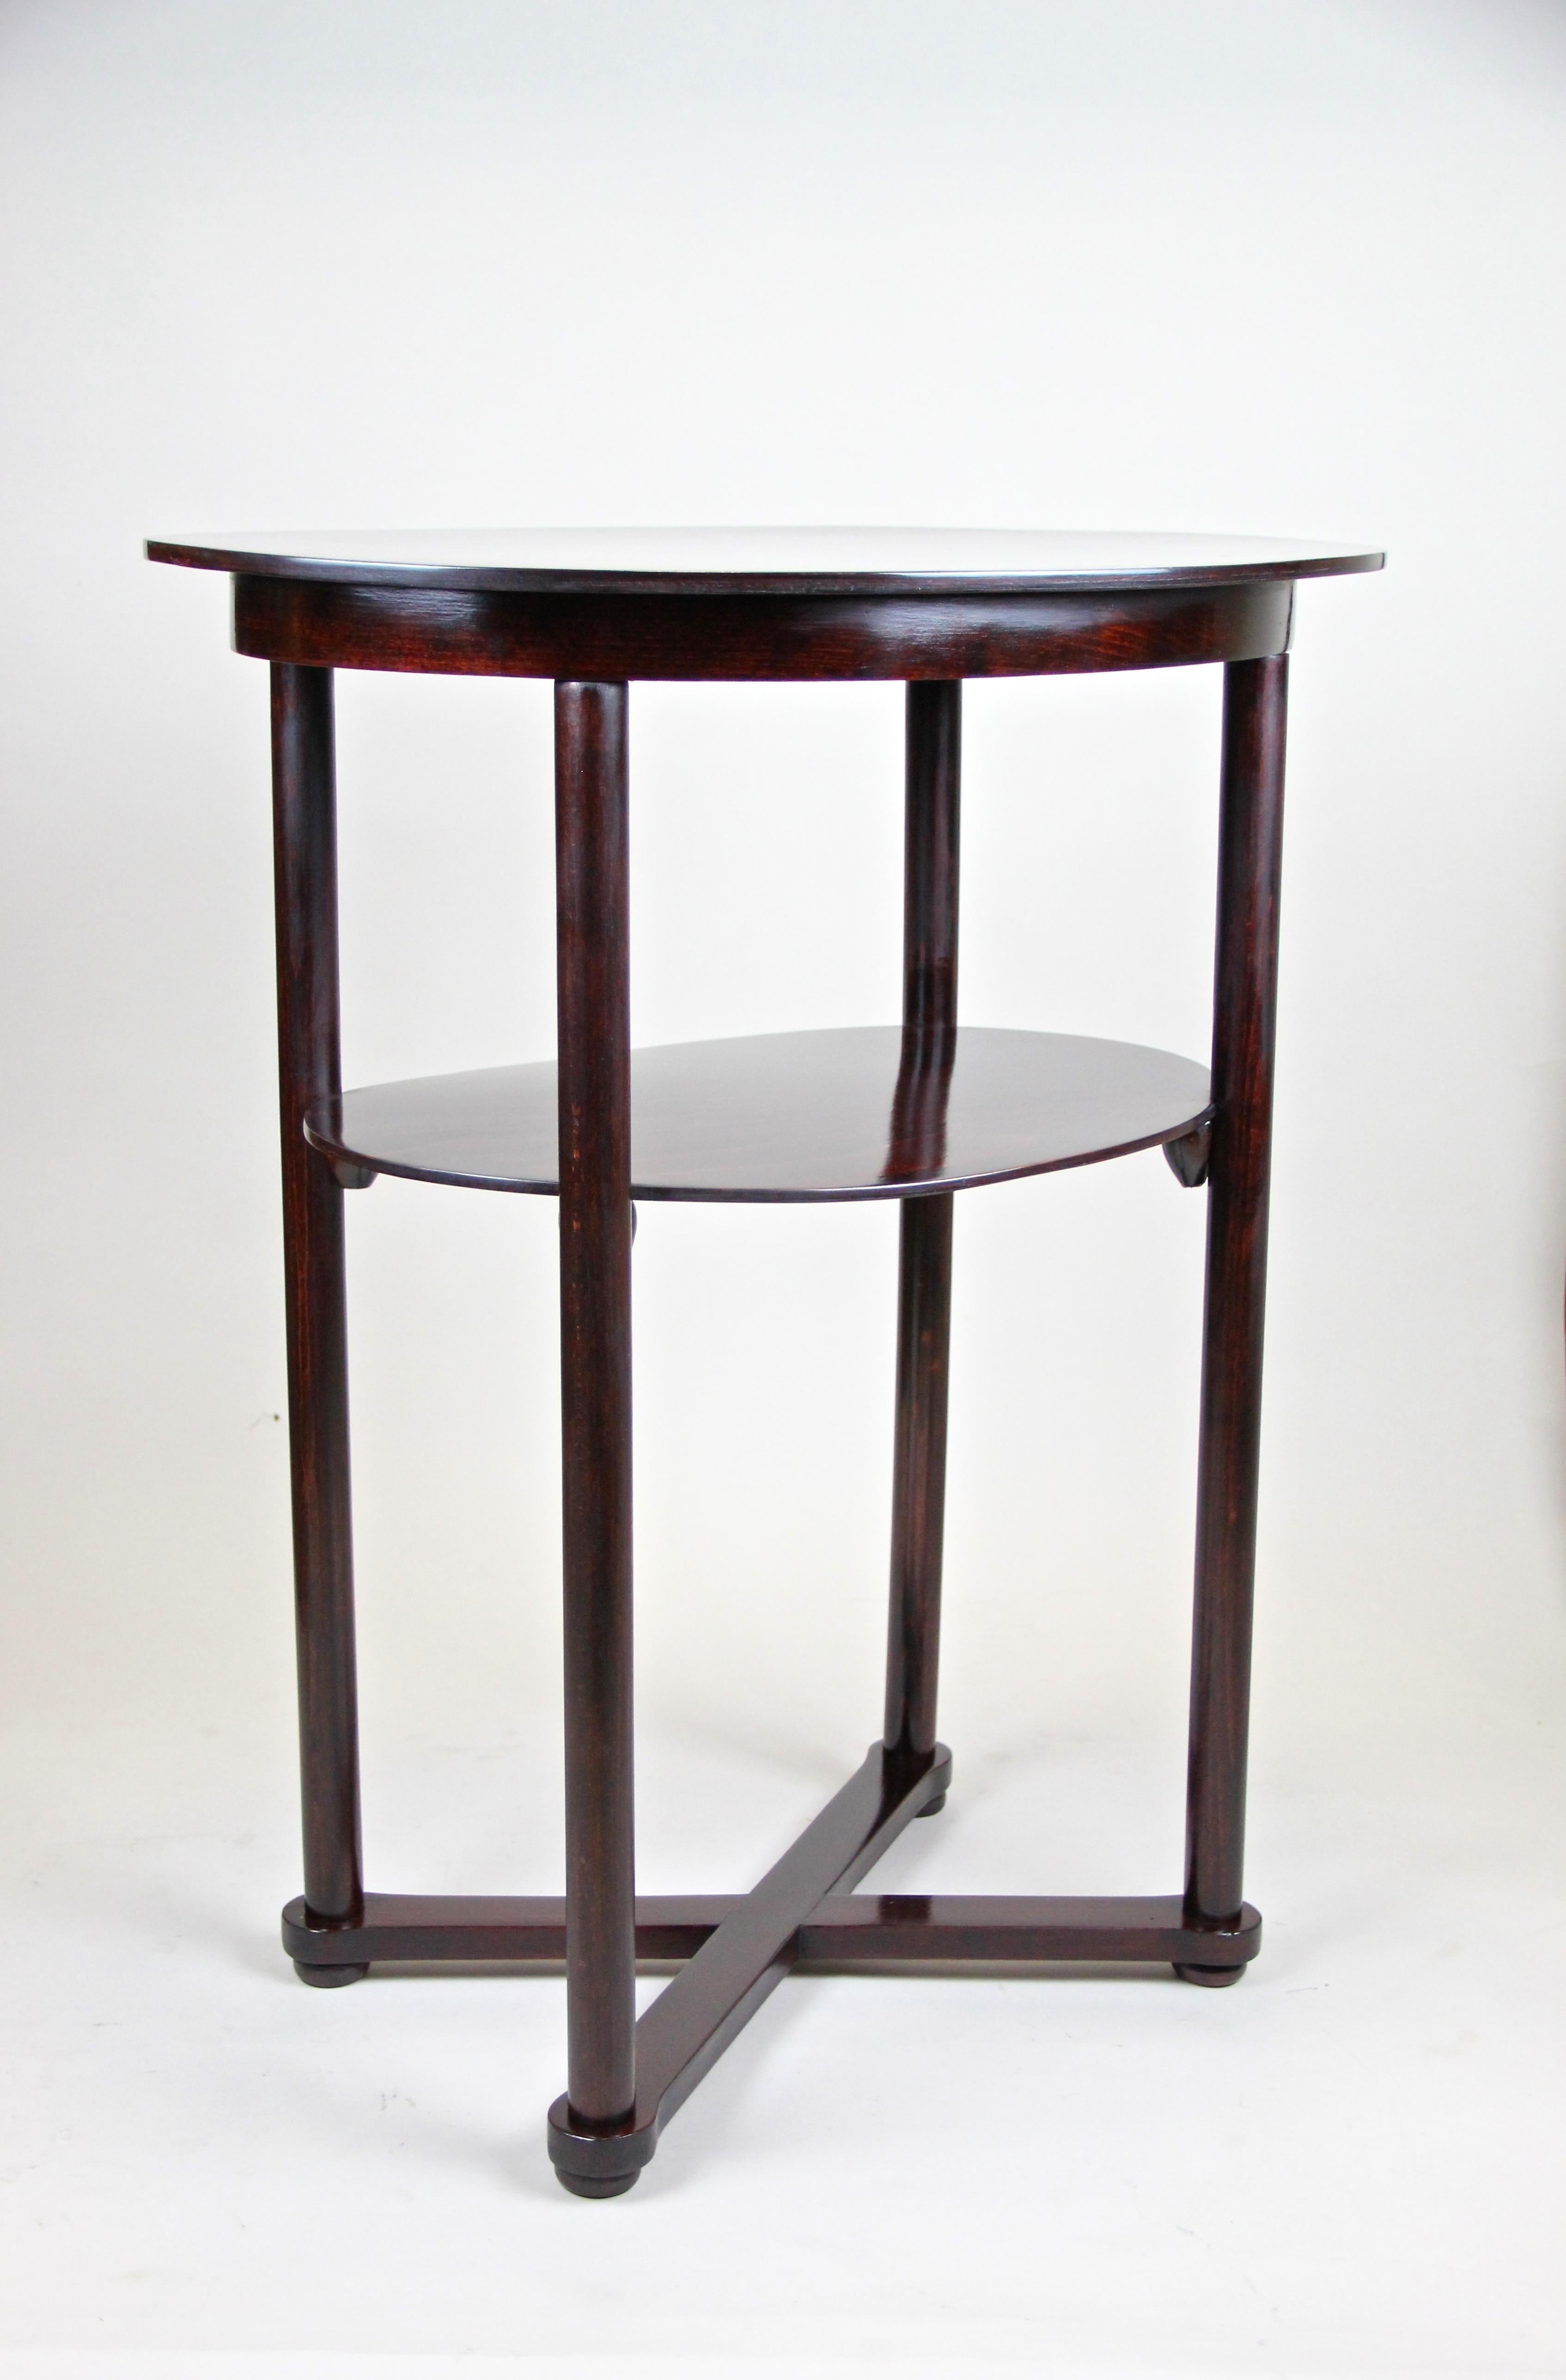 Gorgeous Art Nouveau Thonet side table from the renowned company of Thonet, circa 1910. Designed by the world famous Austrian designer Josef Hoffmann, this oval beechwood side table comes with an impressing timeless shape and fits perfect to modern